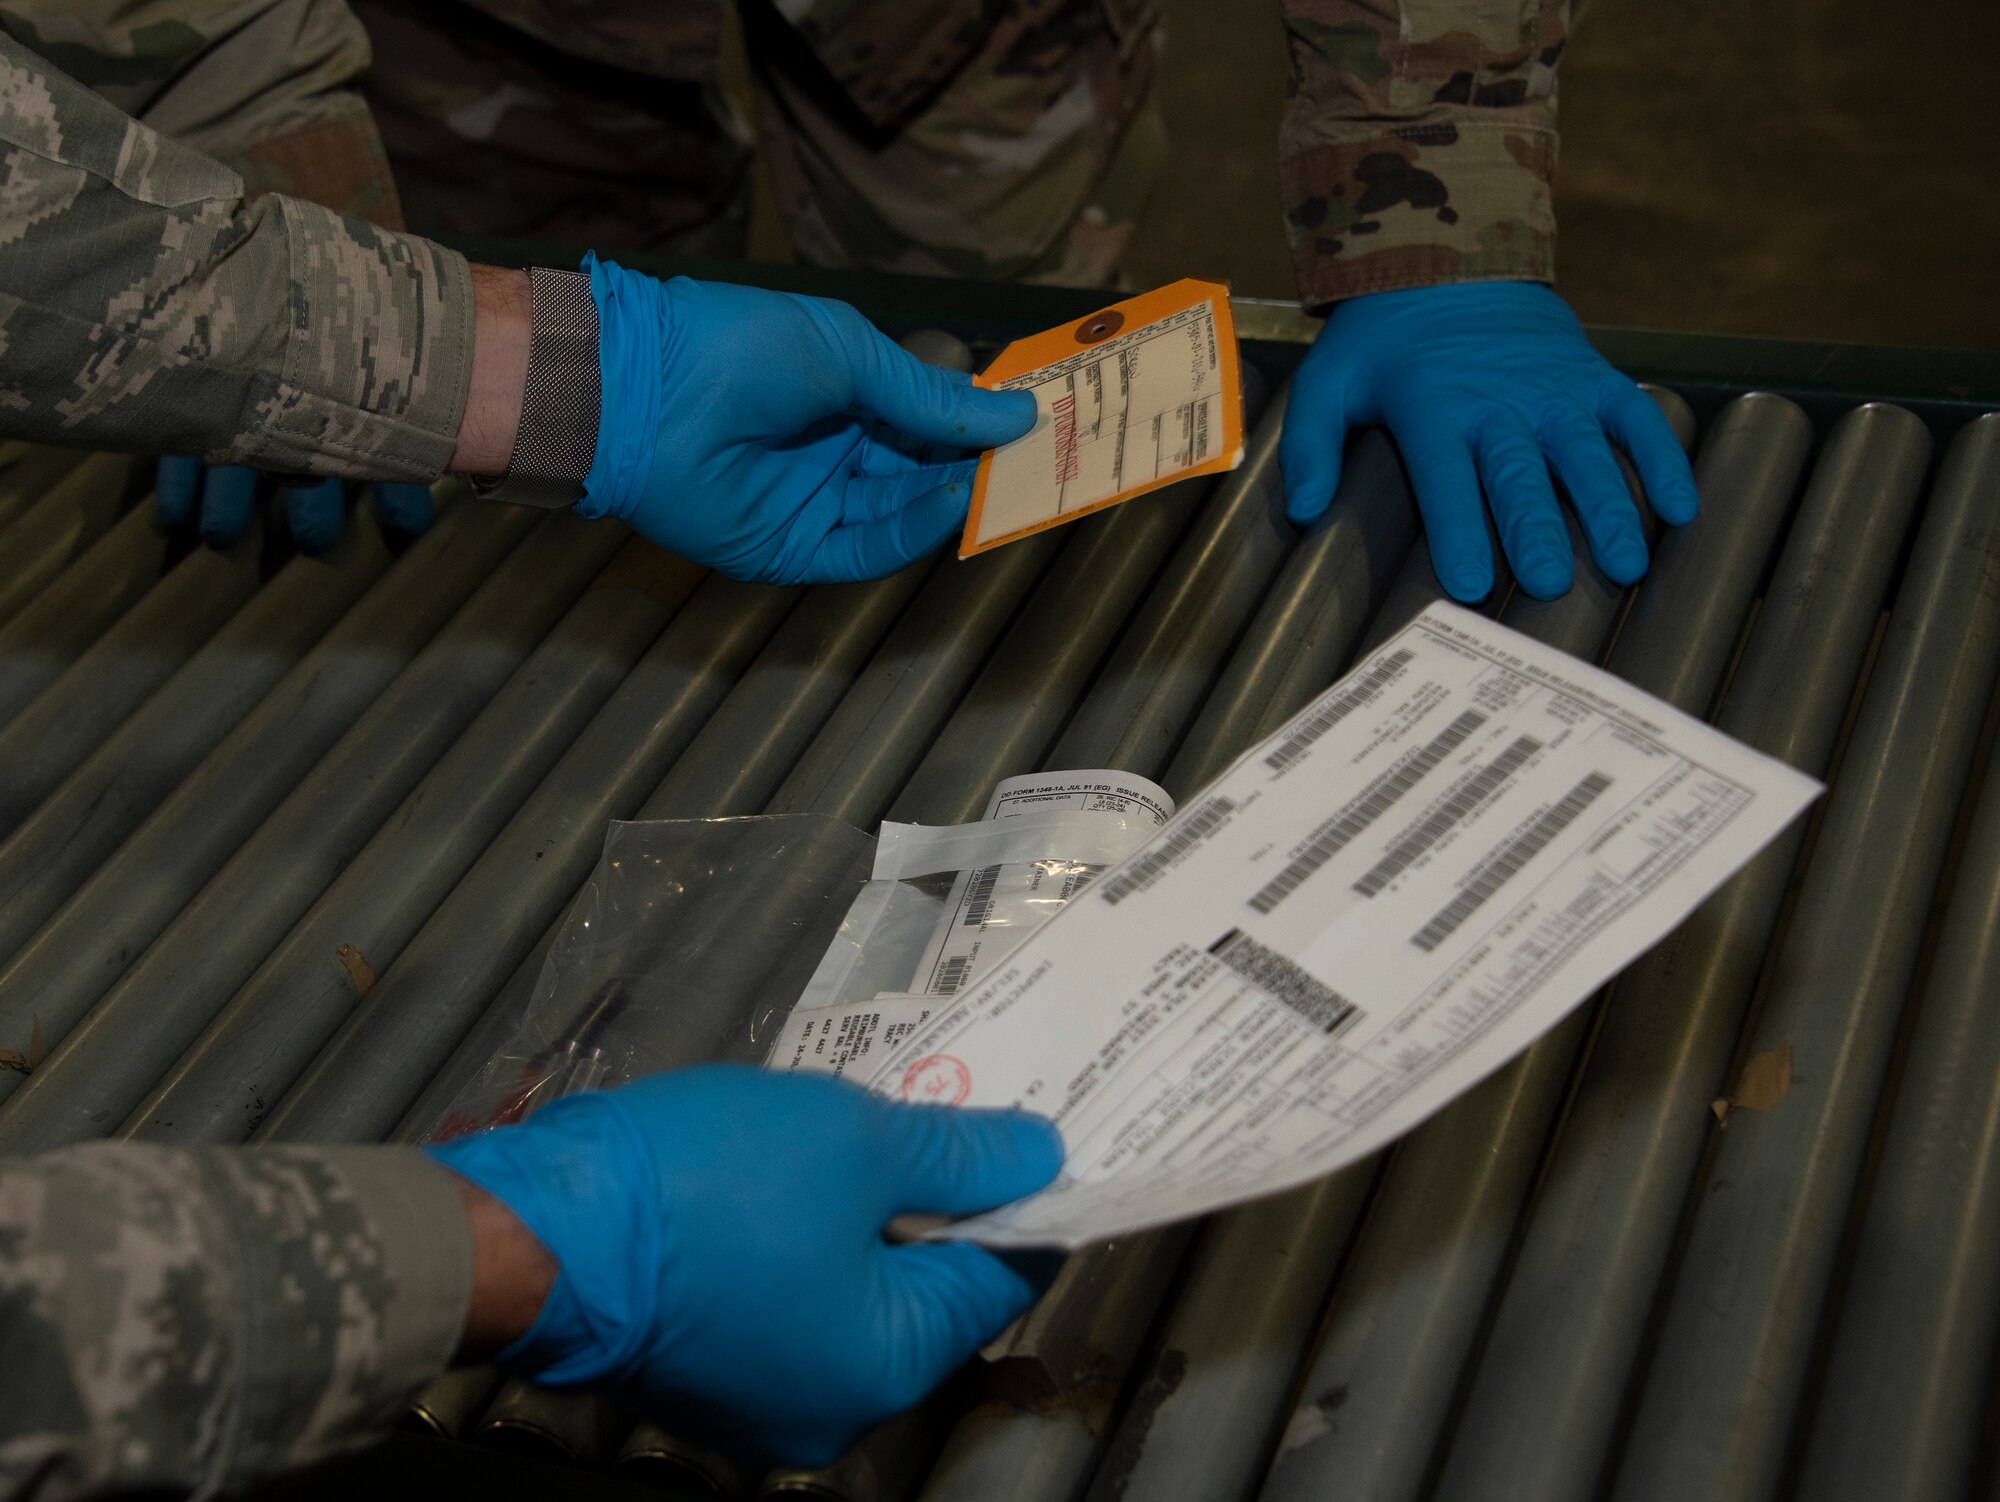 U.S. Air Force Airman 1st Class Yaser Belal, left, 60th Aerial Port Squadron packing and crating technician, shows Chief Master Sgt. Robert Schultz, 60th Air Mobility Wing command chief, the various labels that are affixed to shipment containers during Leadership Rounds July 24, 2020, at Travis Air Force Base, California. The 60th APS is the United States Transportation Command's primary west coast aerial port providing global and passenger distribution for the United States and its Allies. The Leadership Rounds program provides 60th AMW leadership an opportunity to interact with Airmen and get a detailed view of each mission performed at Travis AFB. (U.S. Air Force photo by Heide Couch)